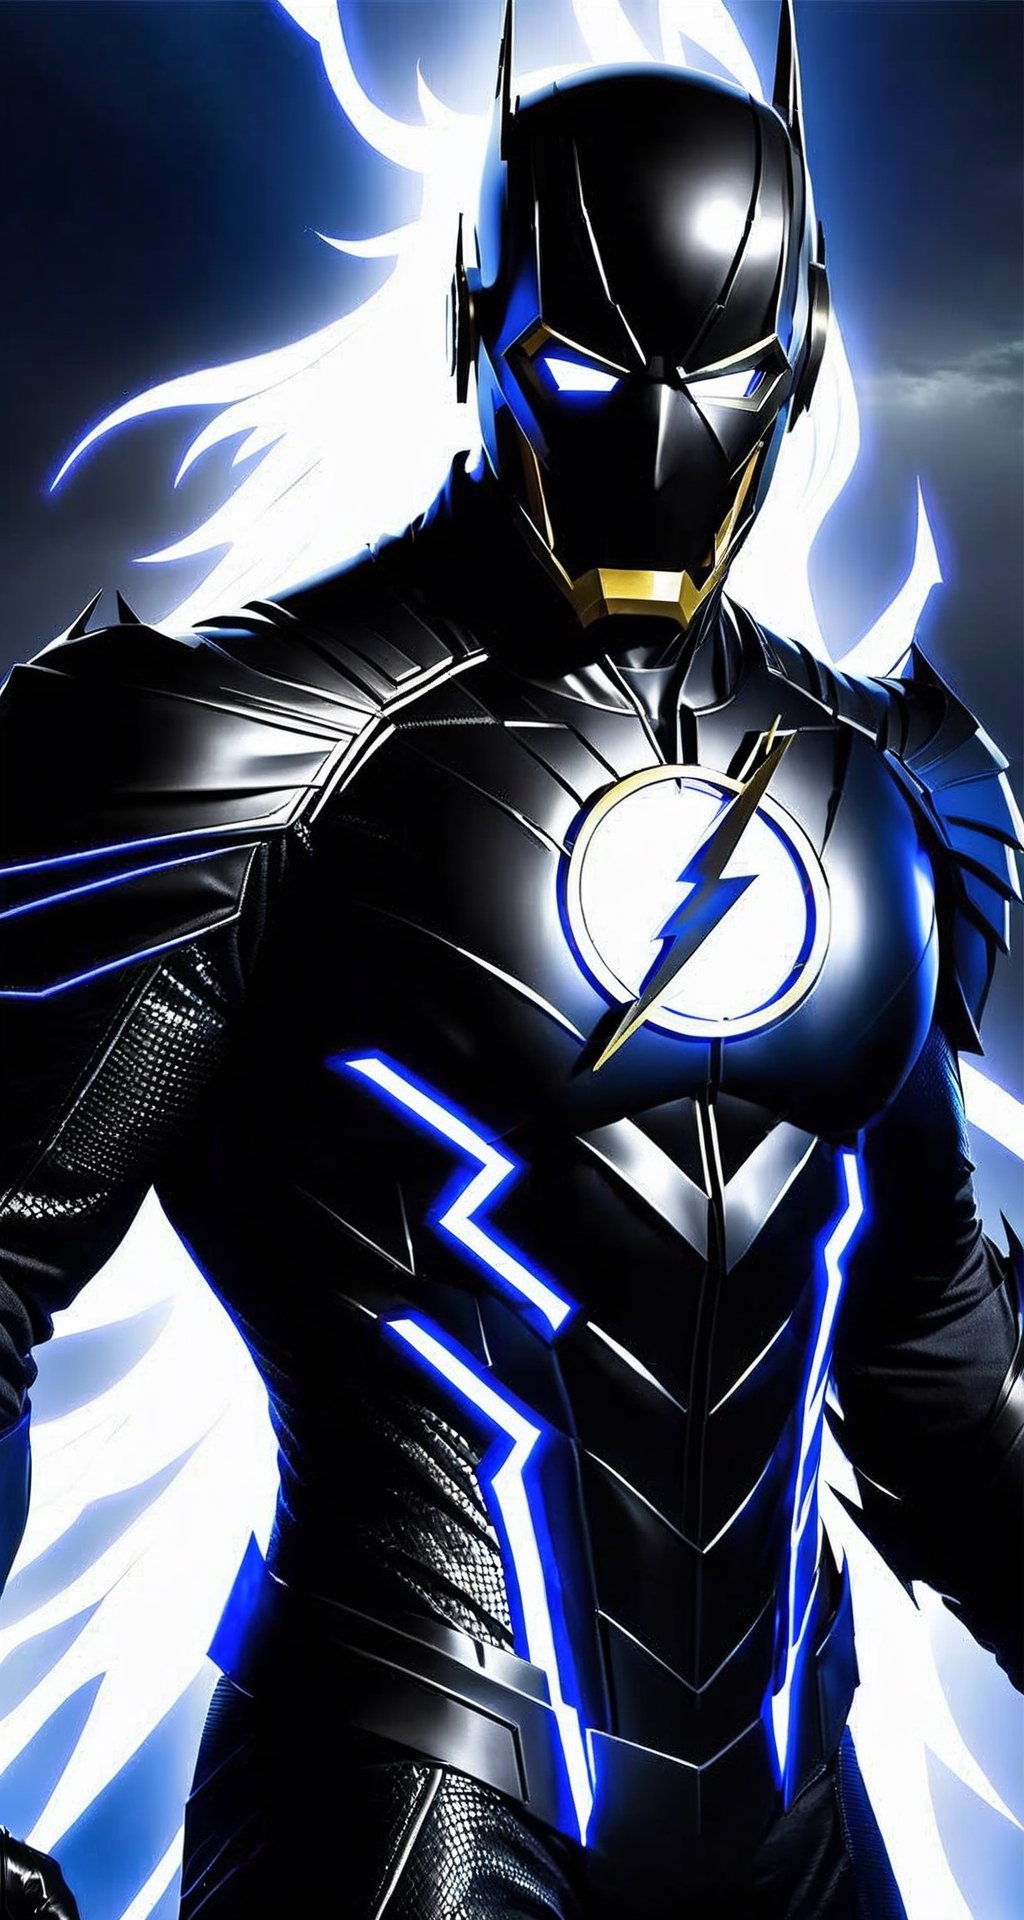 "Generate a compelling image of Zoom, the villain from the Flash TV series. Capture the sinister presence of Zoom with a focus on his distinctive costume and menacing demeanor. Pay attention to the details of his suit, including the intricate design and color scheme. Utilize a high-resolution setting to ensure the image brings out the ominous essence of Zoom, emphasizing the character's presence and intensity."